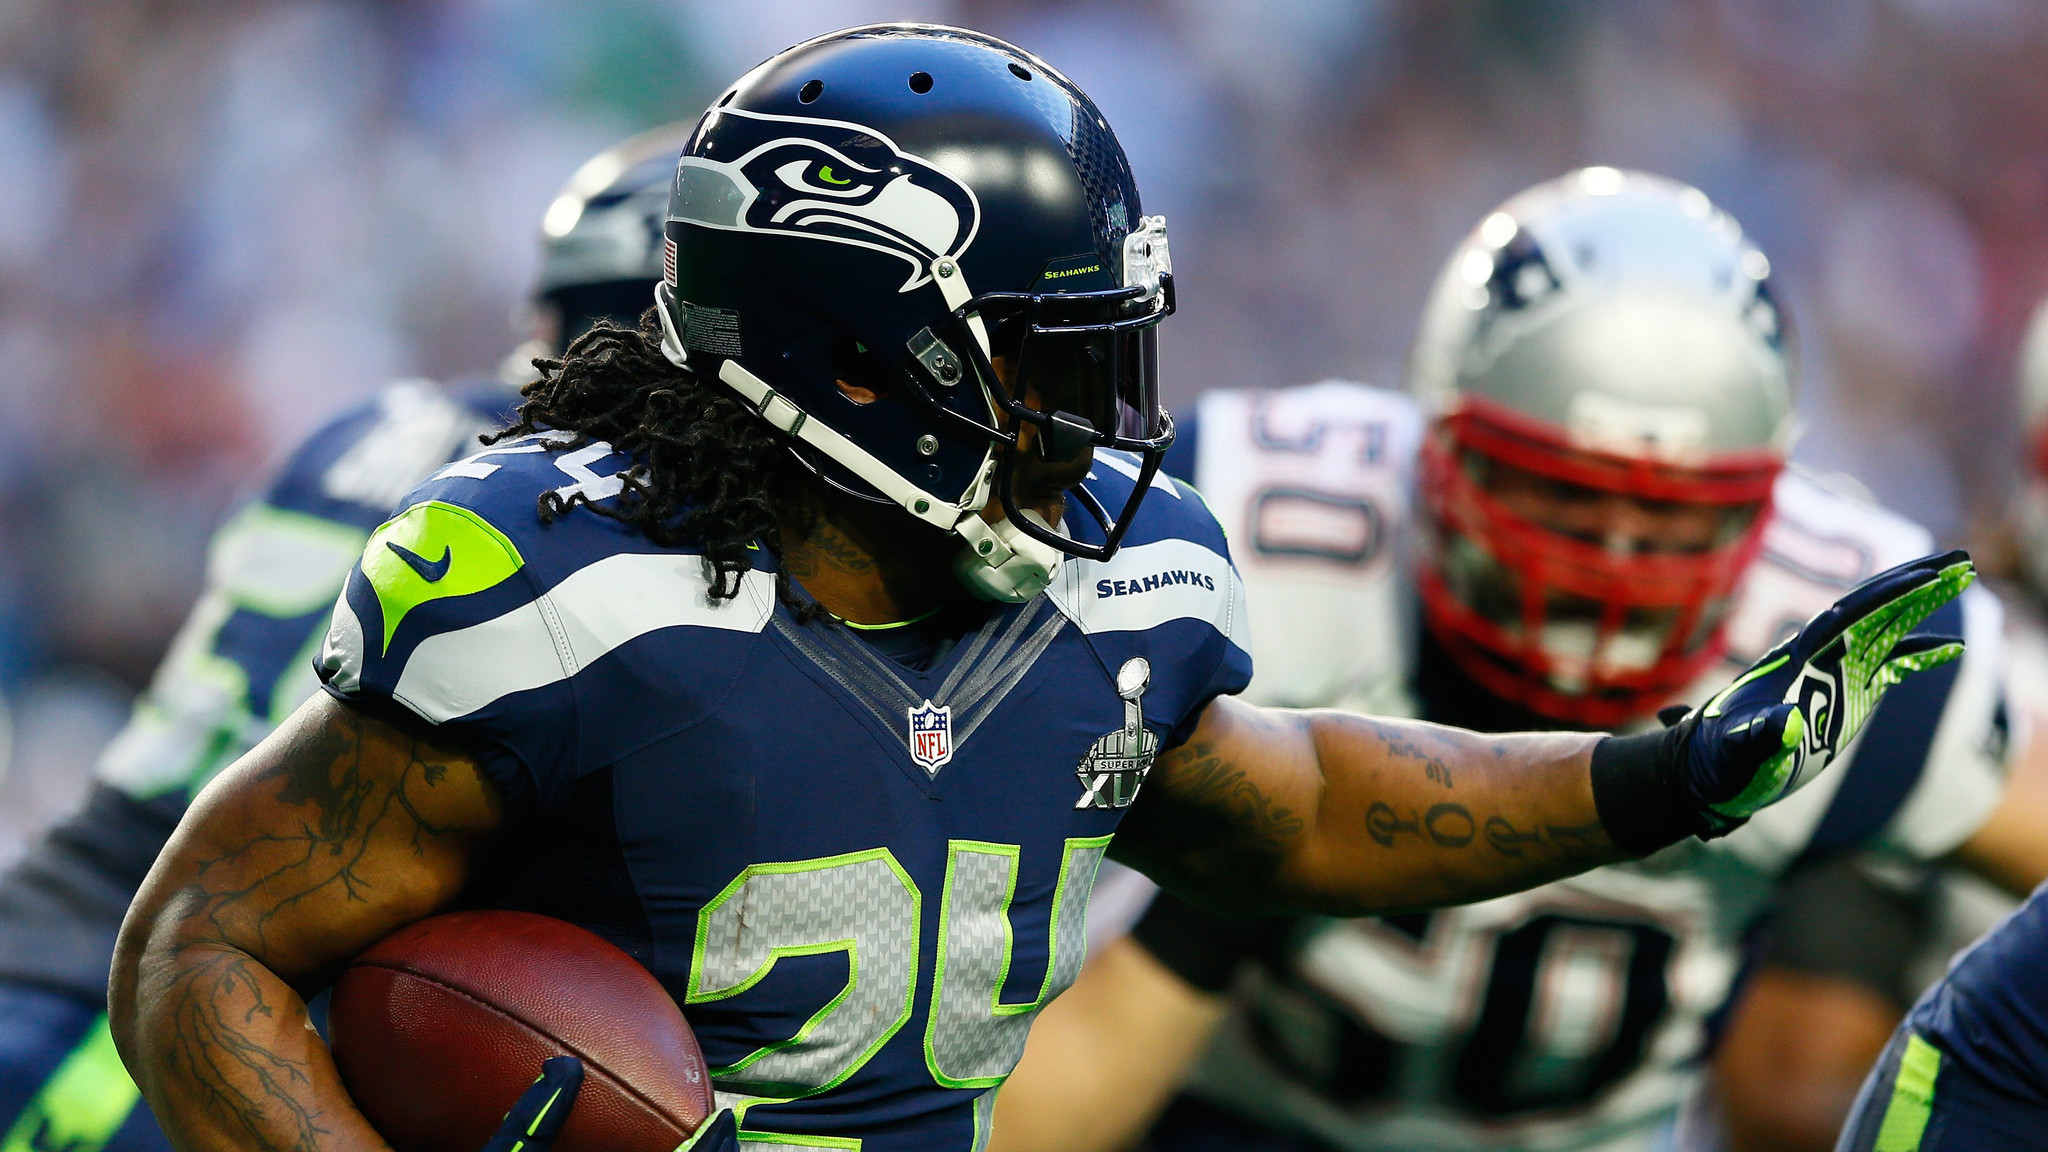 Marshawn Lynch I was expecting the ball on decisive Super Bowl play – LA Times